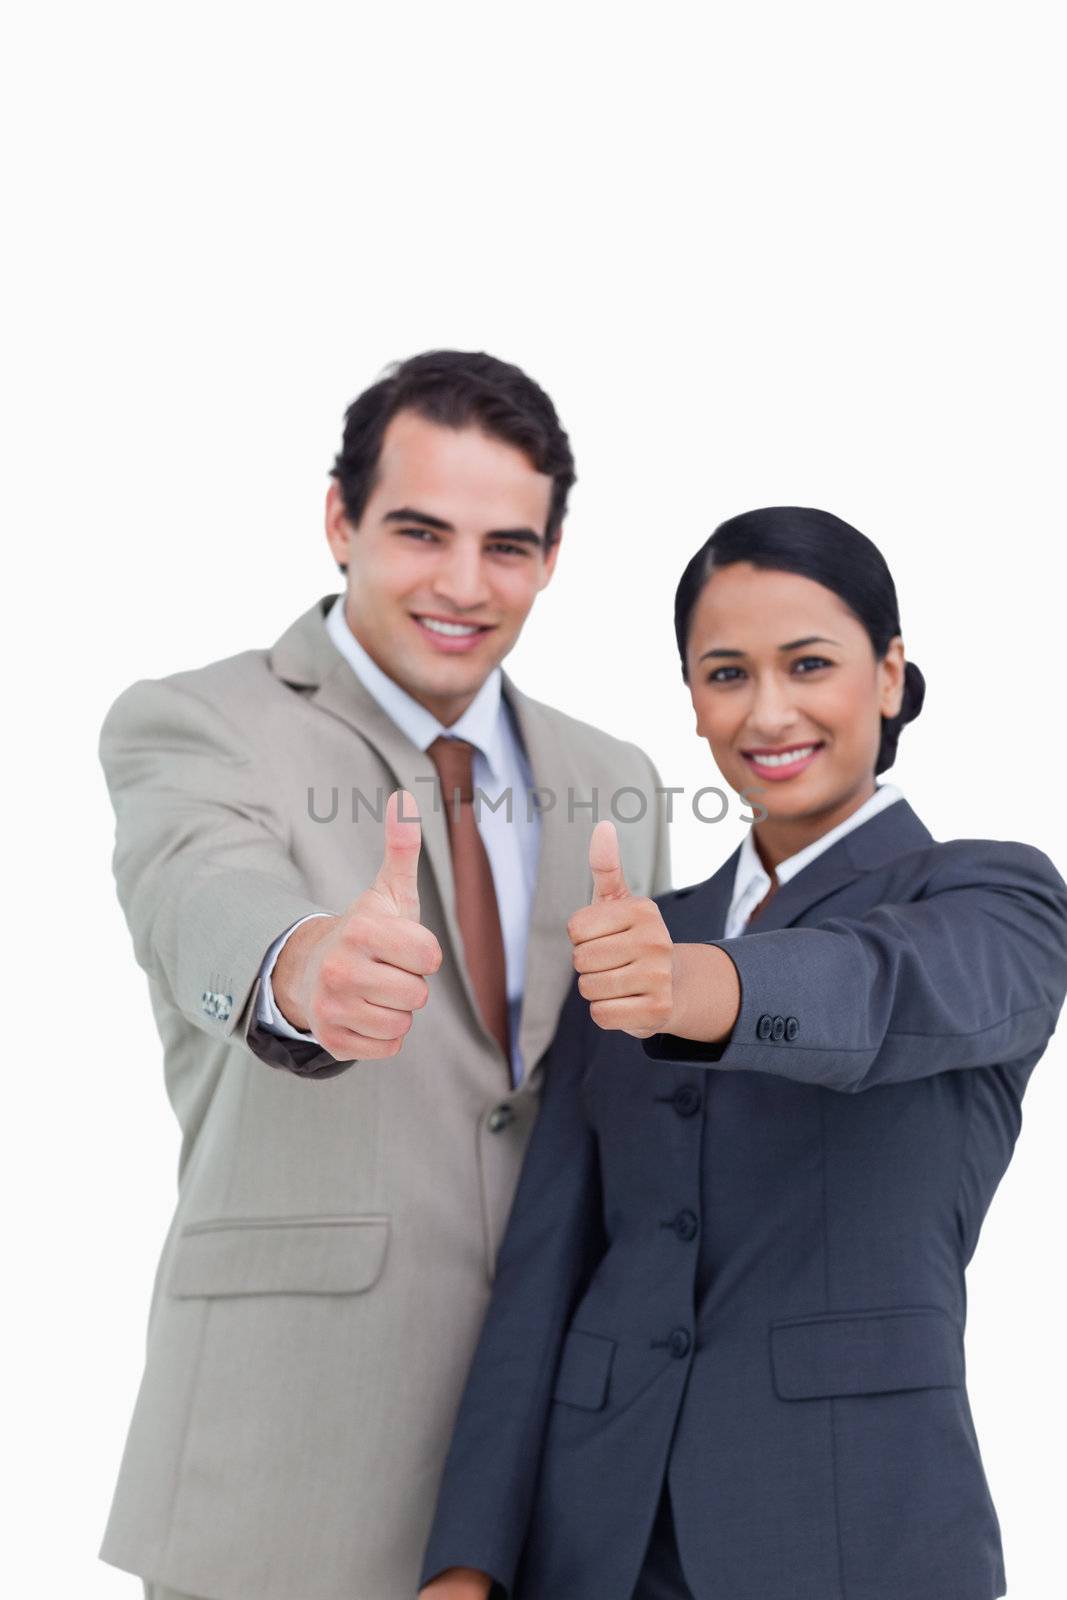 Smiling young salesteam giving their approval against a white background